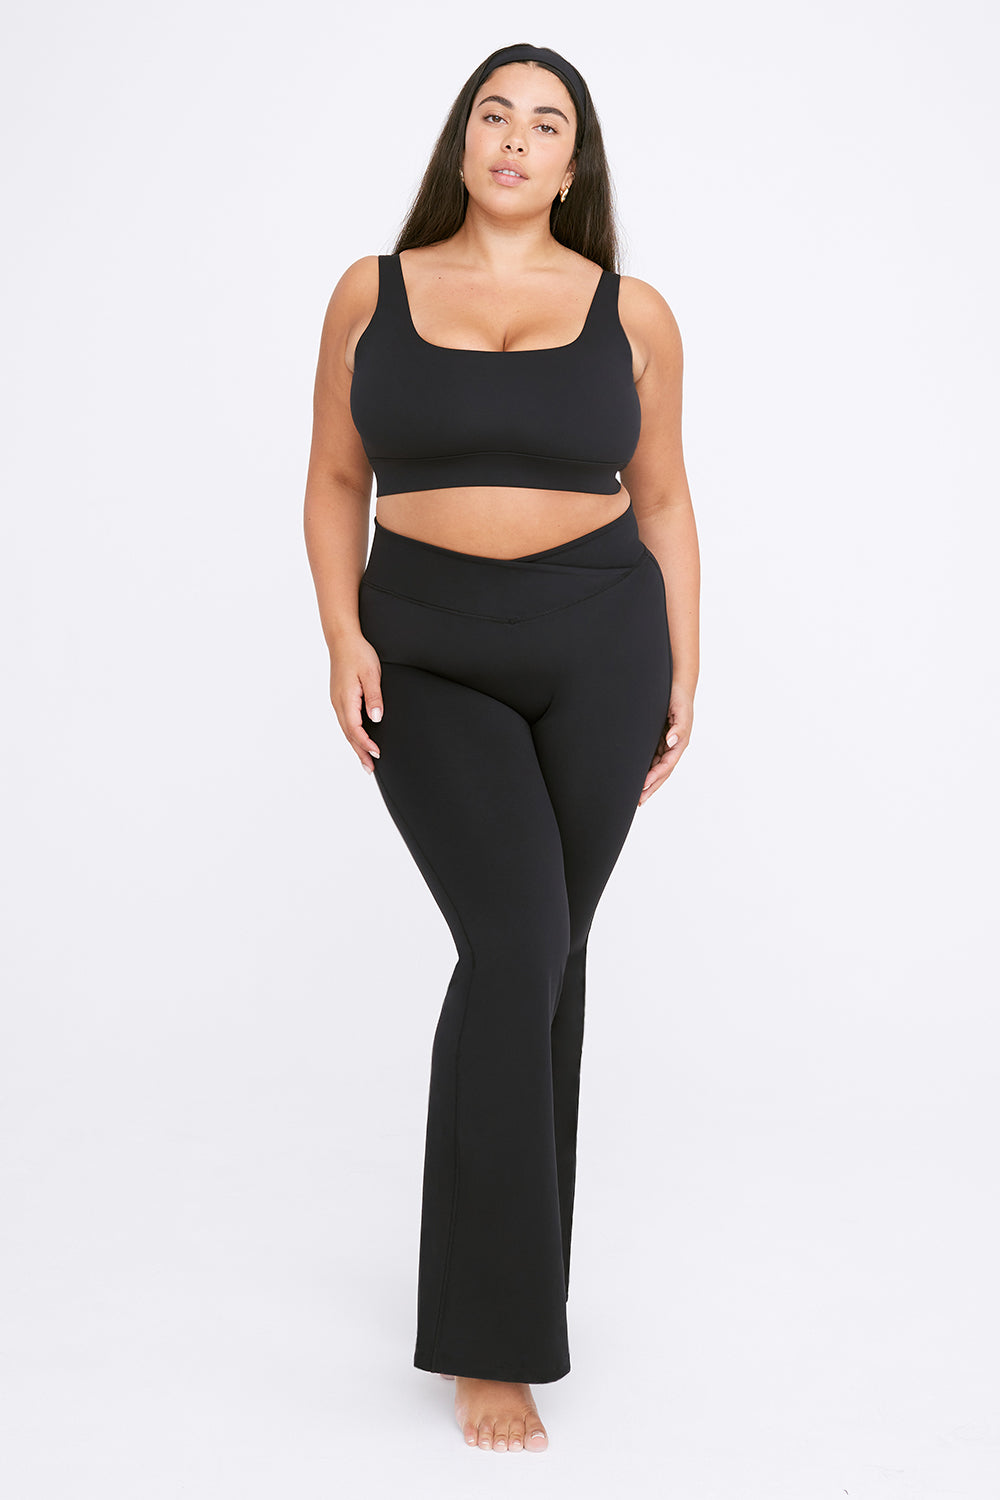 The Best Yoga Outfits for Women of all Shapes and Sizes - The Yoga